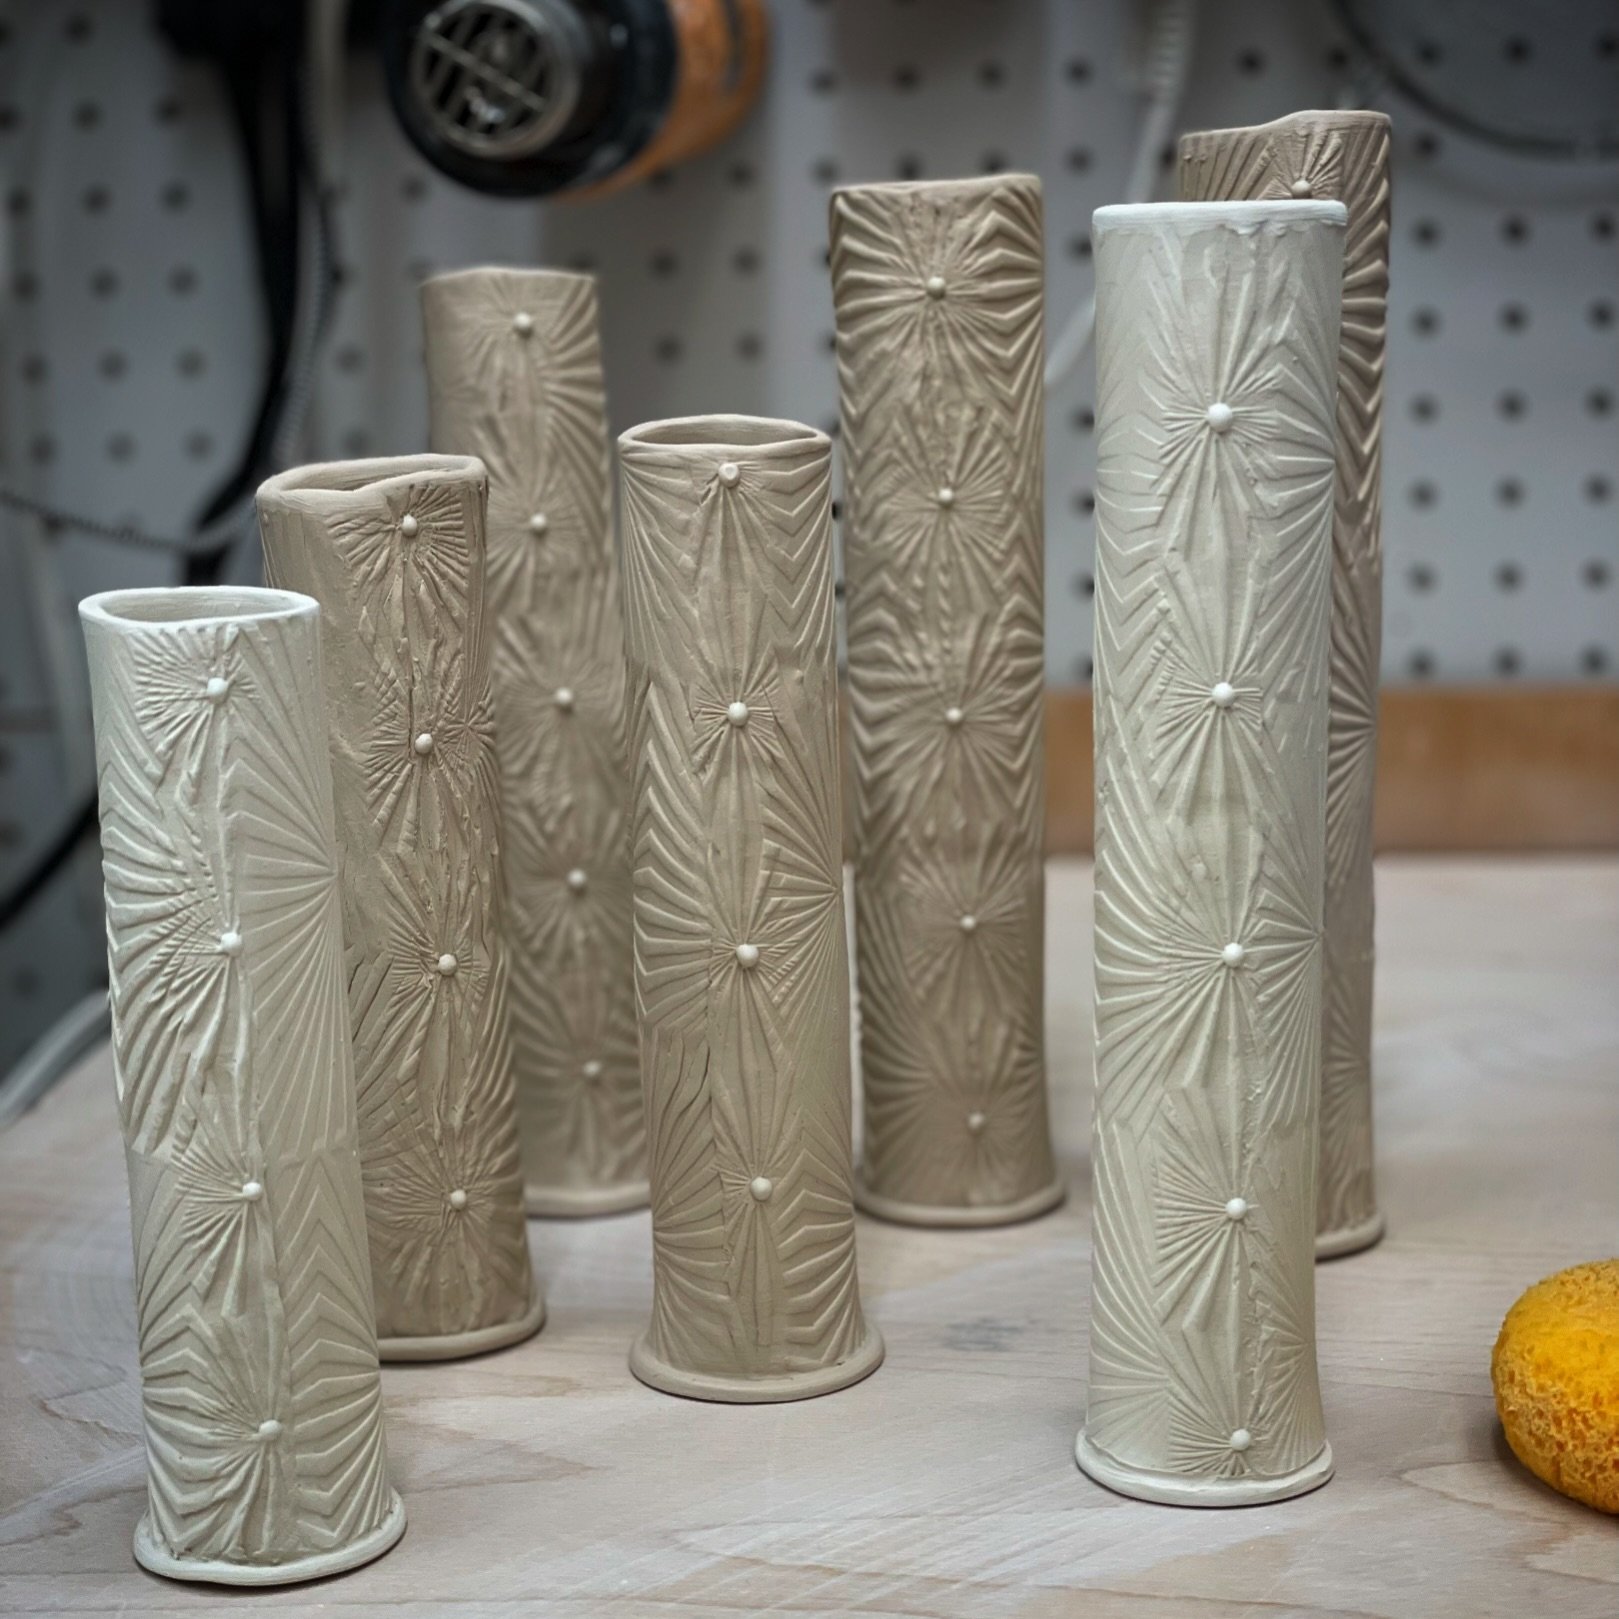 Don&rsquo;t worry 😉, I remade some! They are slowly drying under a layer of plastic and behind my thick plastic sheeting shelves. Also, it&rsquo;s warmer out now. 🤞🏻
.
#redux #redo #doover #budvases #ceramics #handbuiltpottery #porcelain #pattern